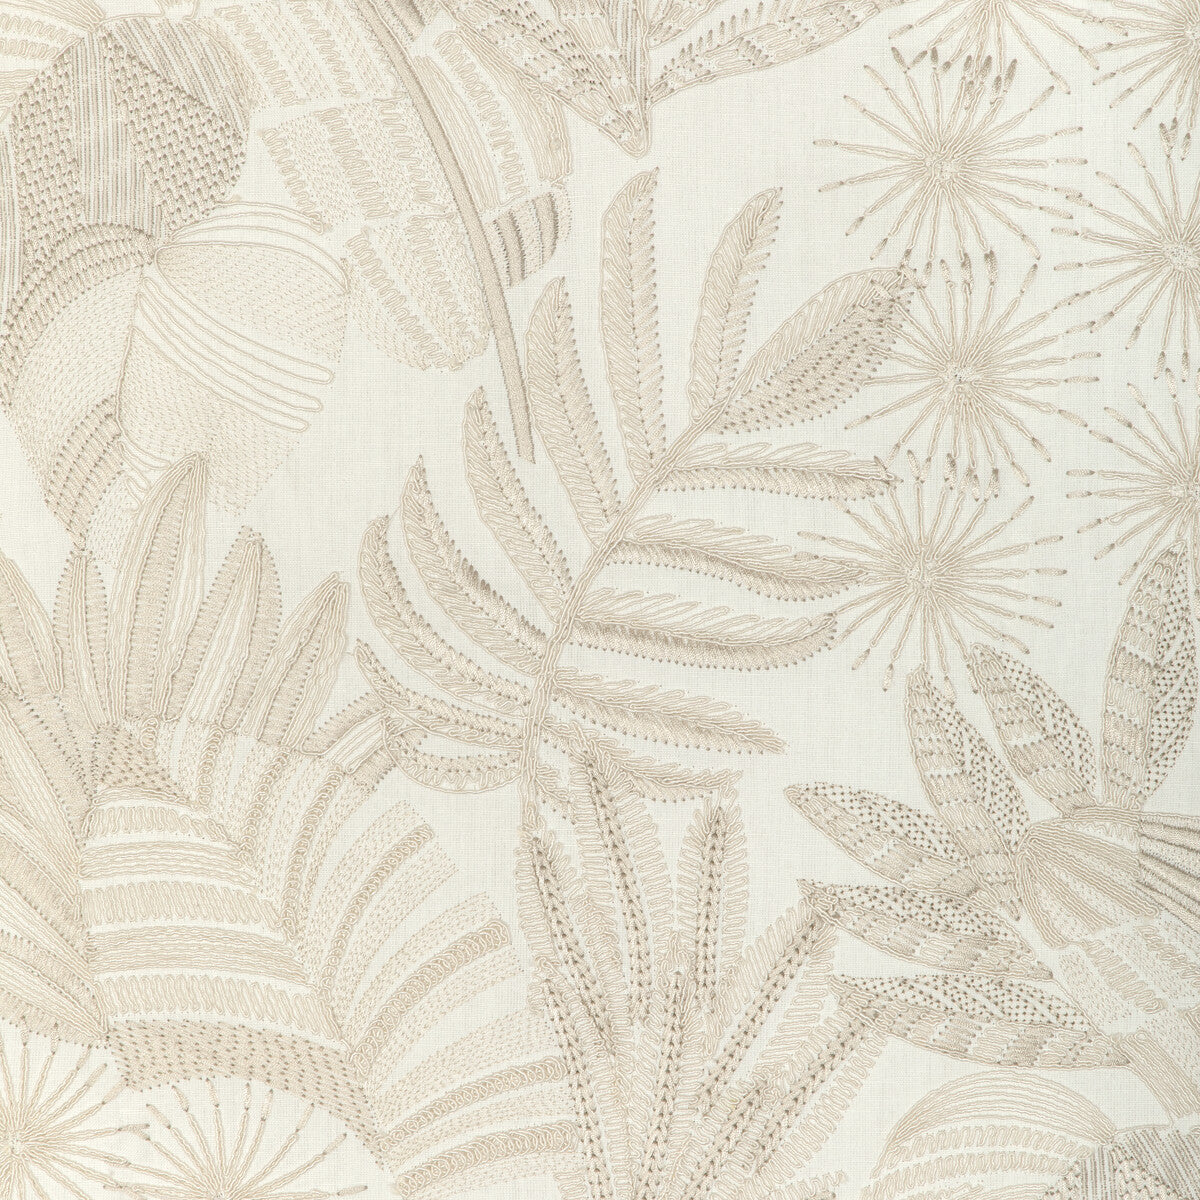 Marajo fabric in ivory color - pattern 37249.1.0 - by Kravet Couture in the Casa Botanica collection